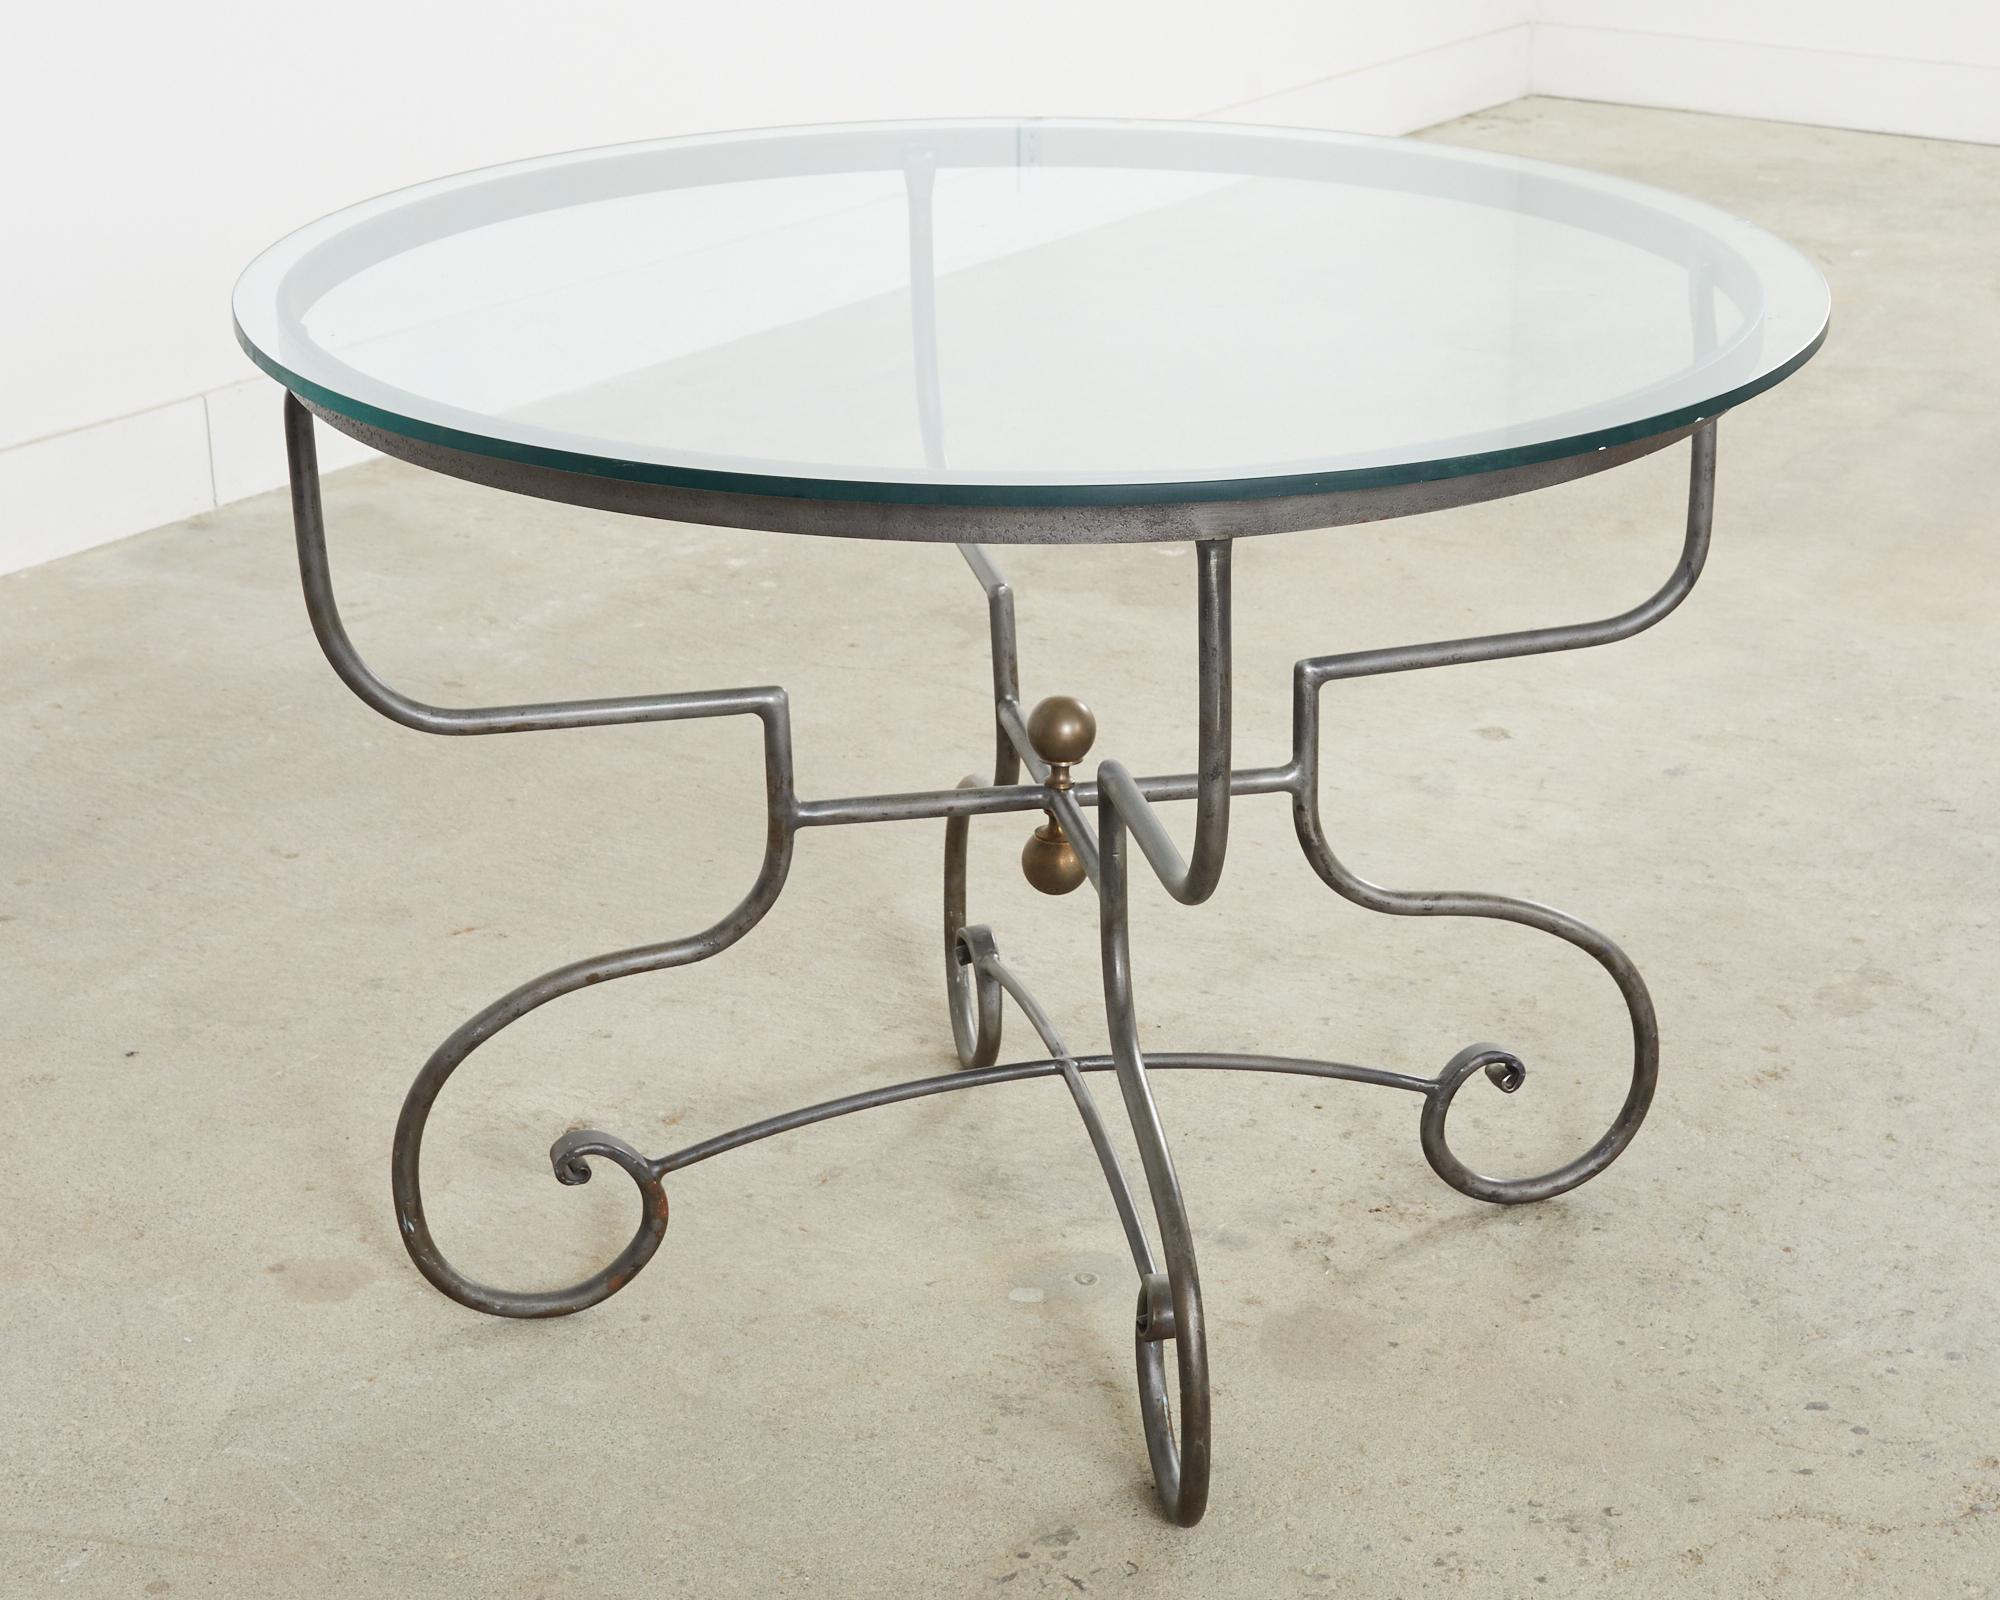 20th Century French Bistro Style Round Iron Glass Garden Dining Table